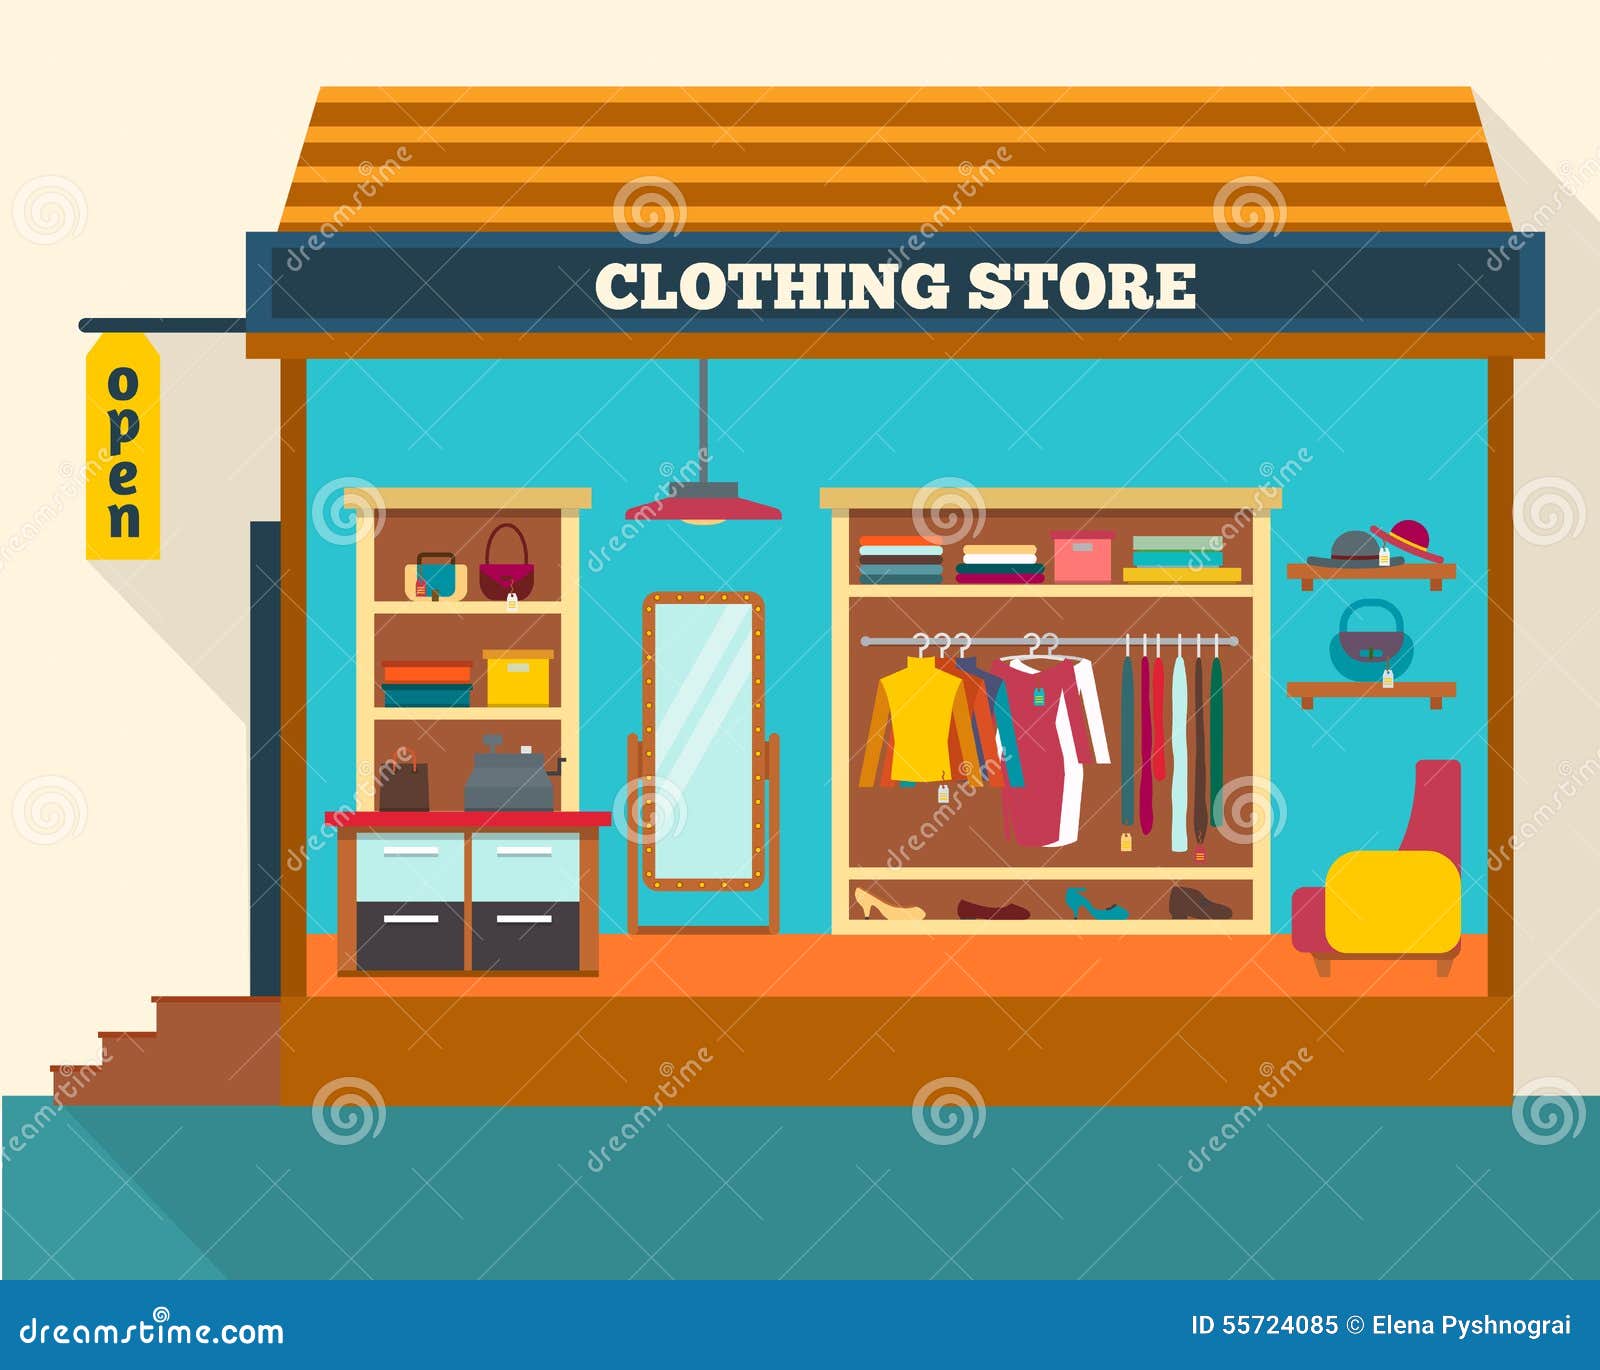 clipart clothing store - photo #18